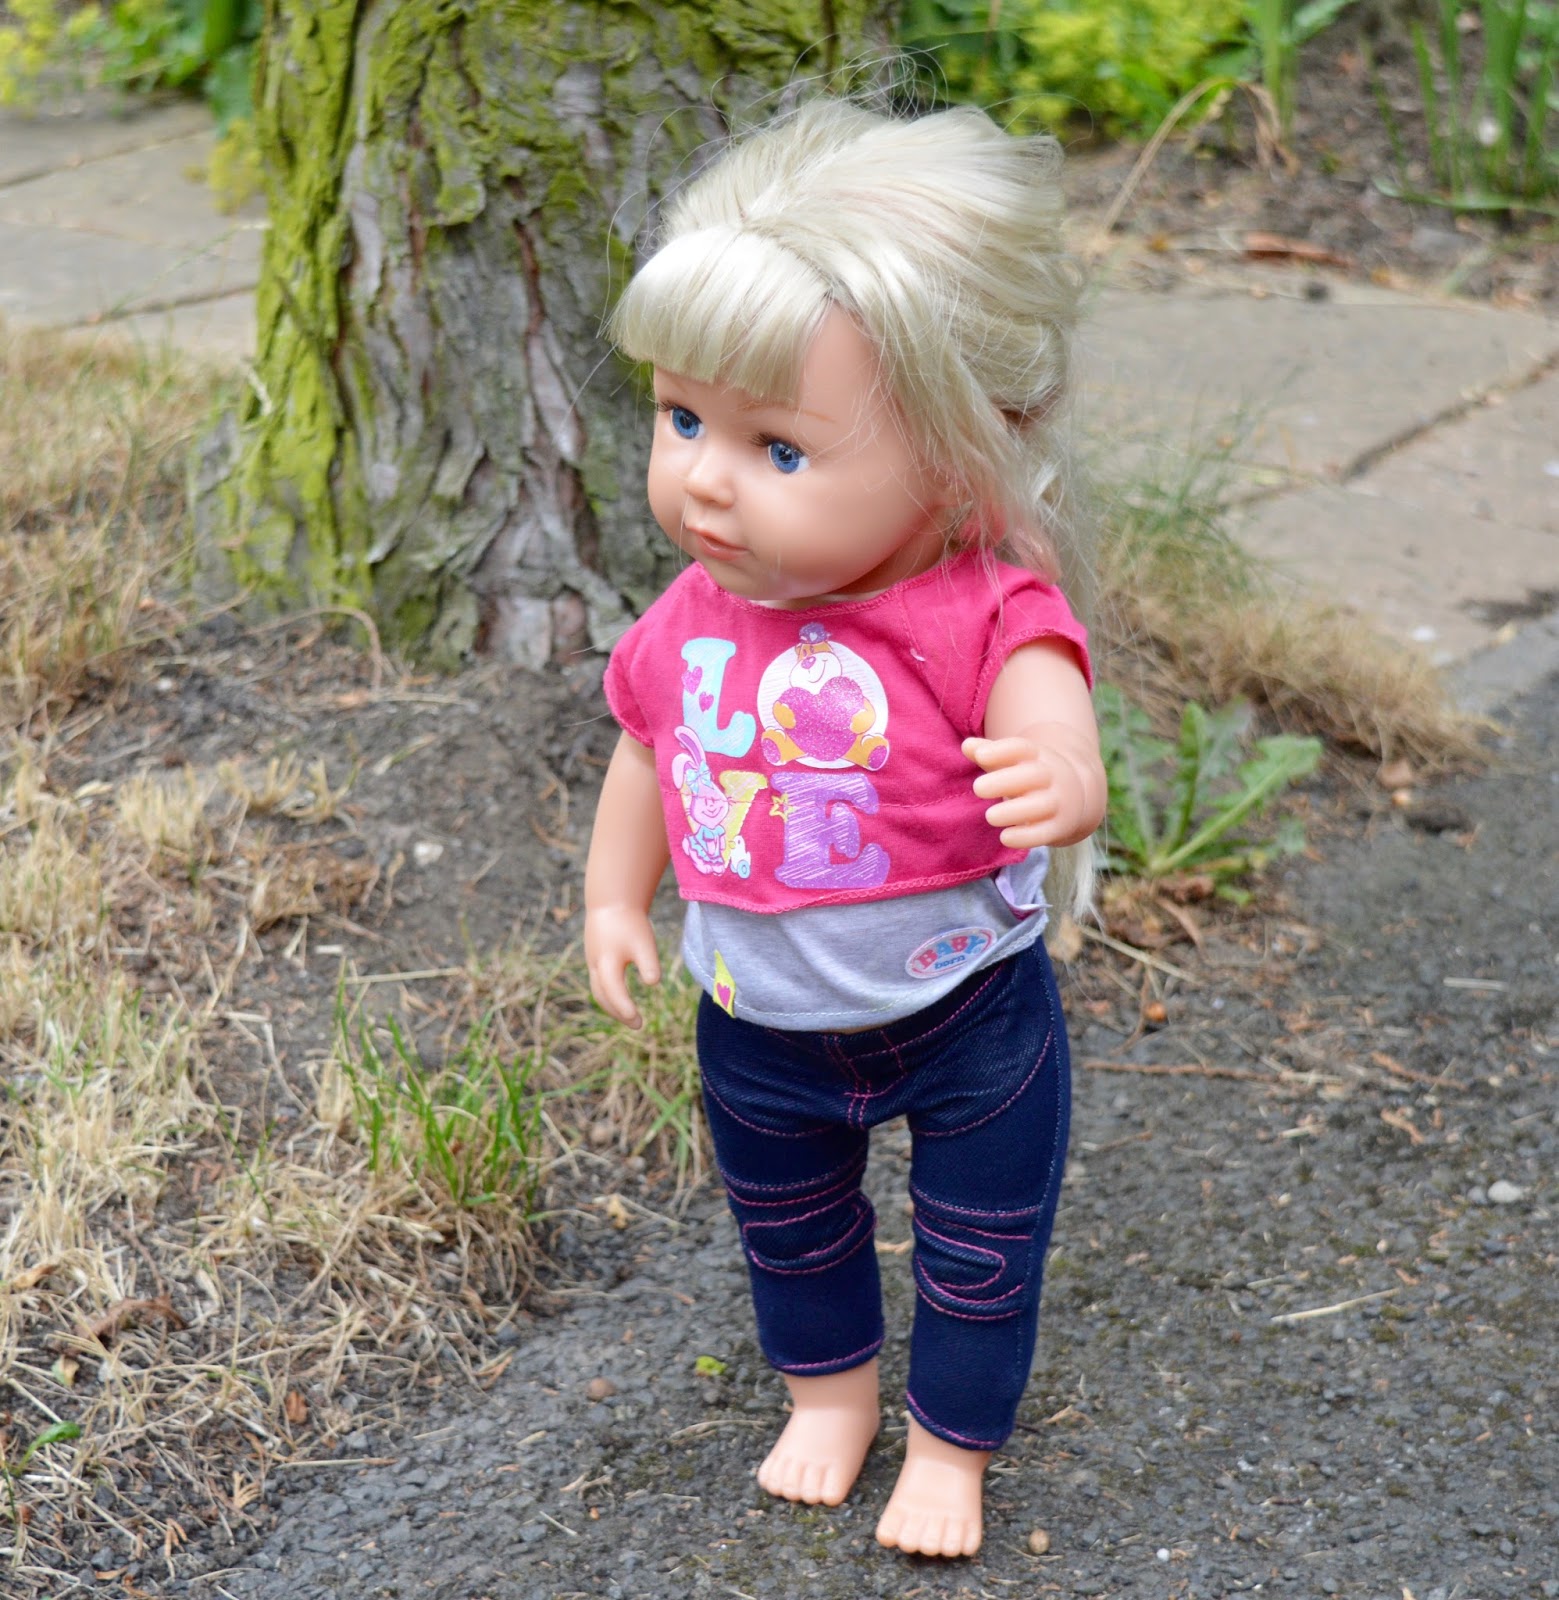 Heidi celebrates #nationalsistersday with her brand new Baby Born Sister Doll